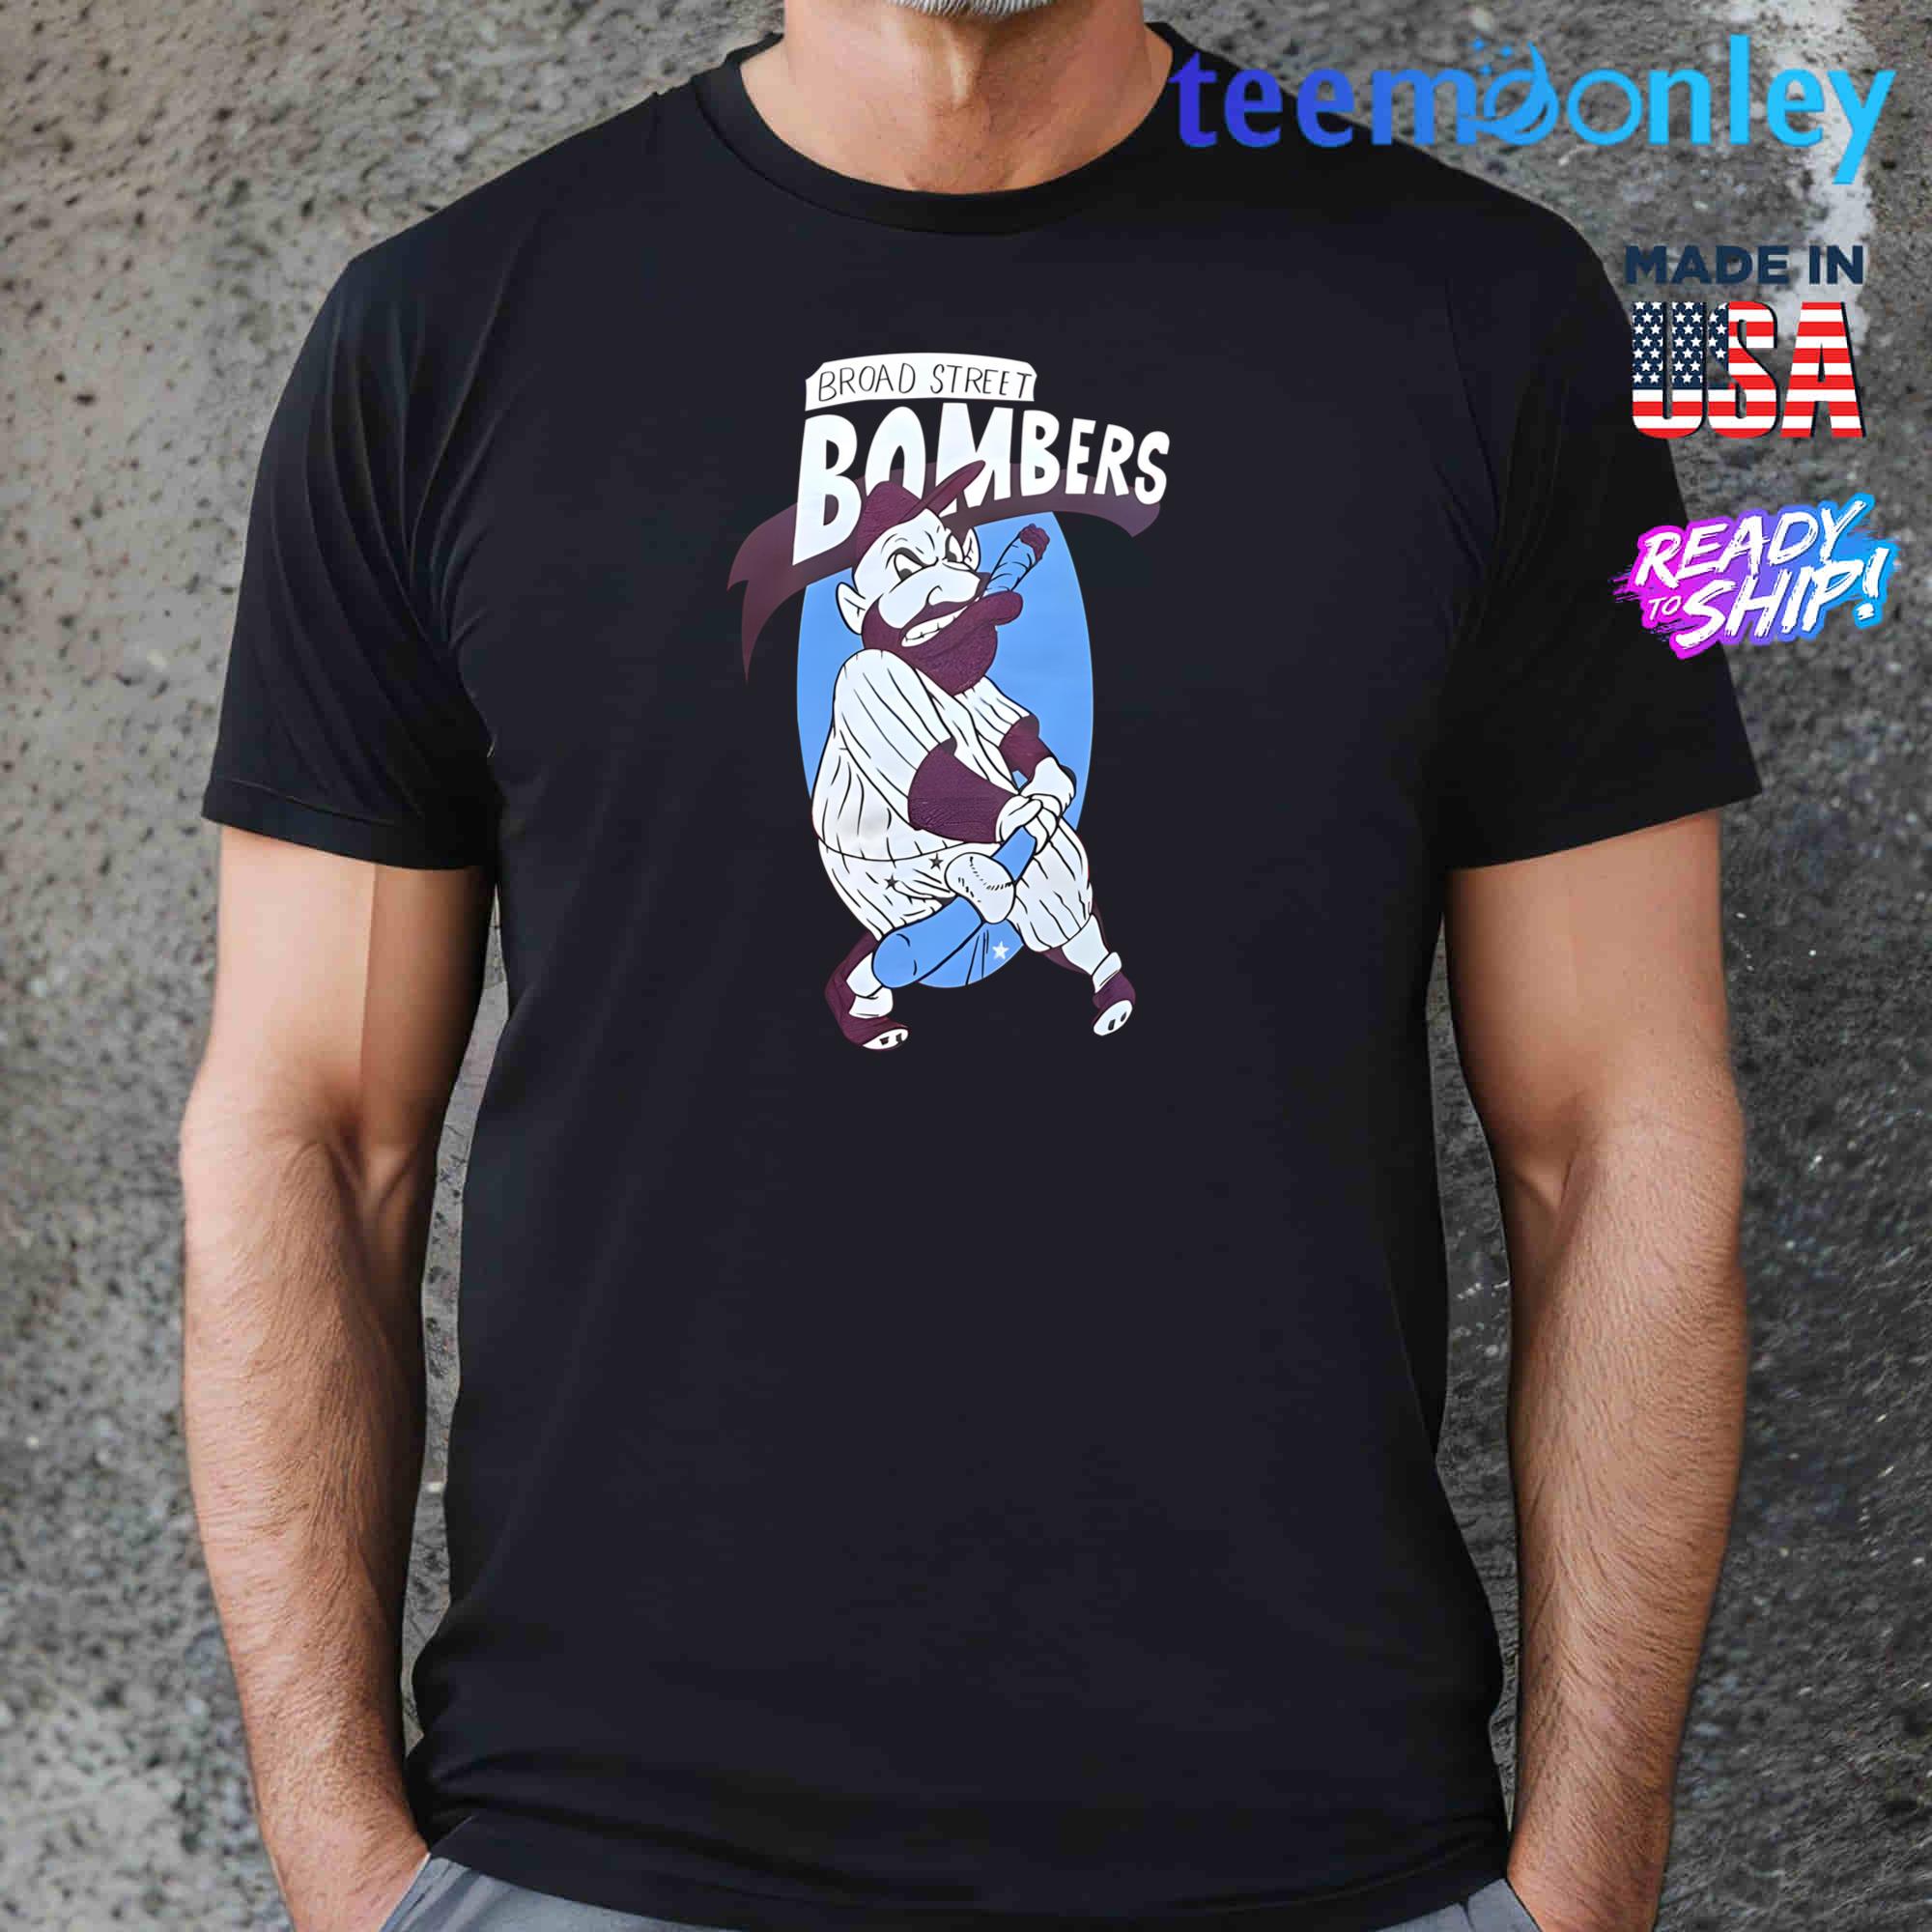 Phillies Marlins Playoff Broad Street Bombers Shirt